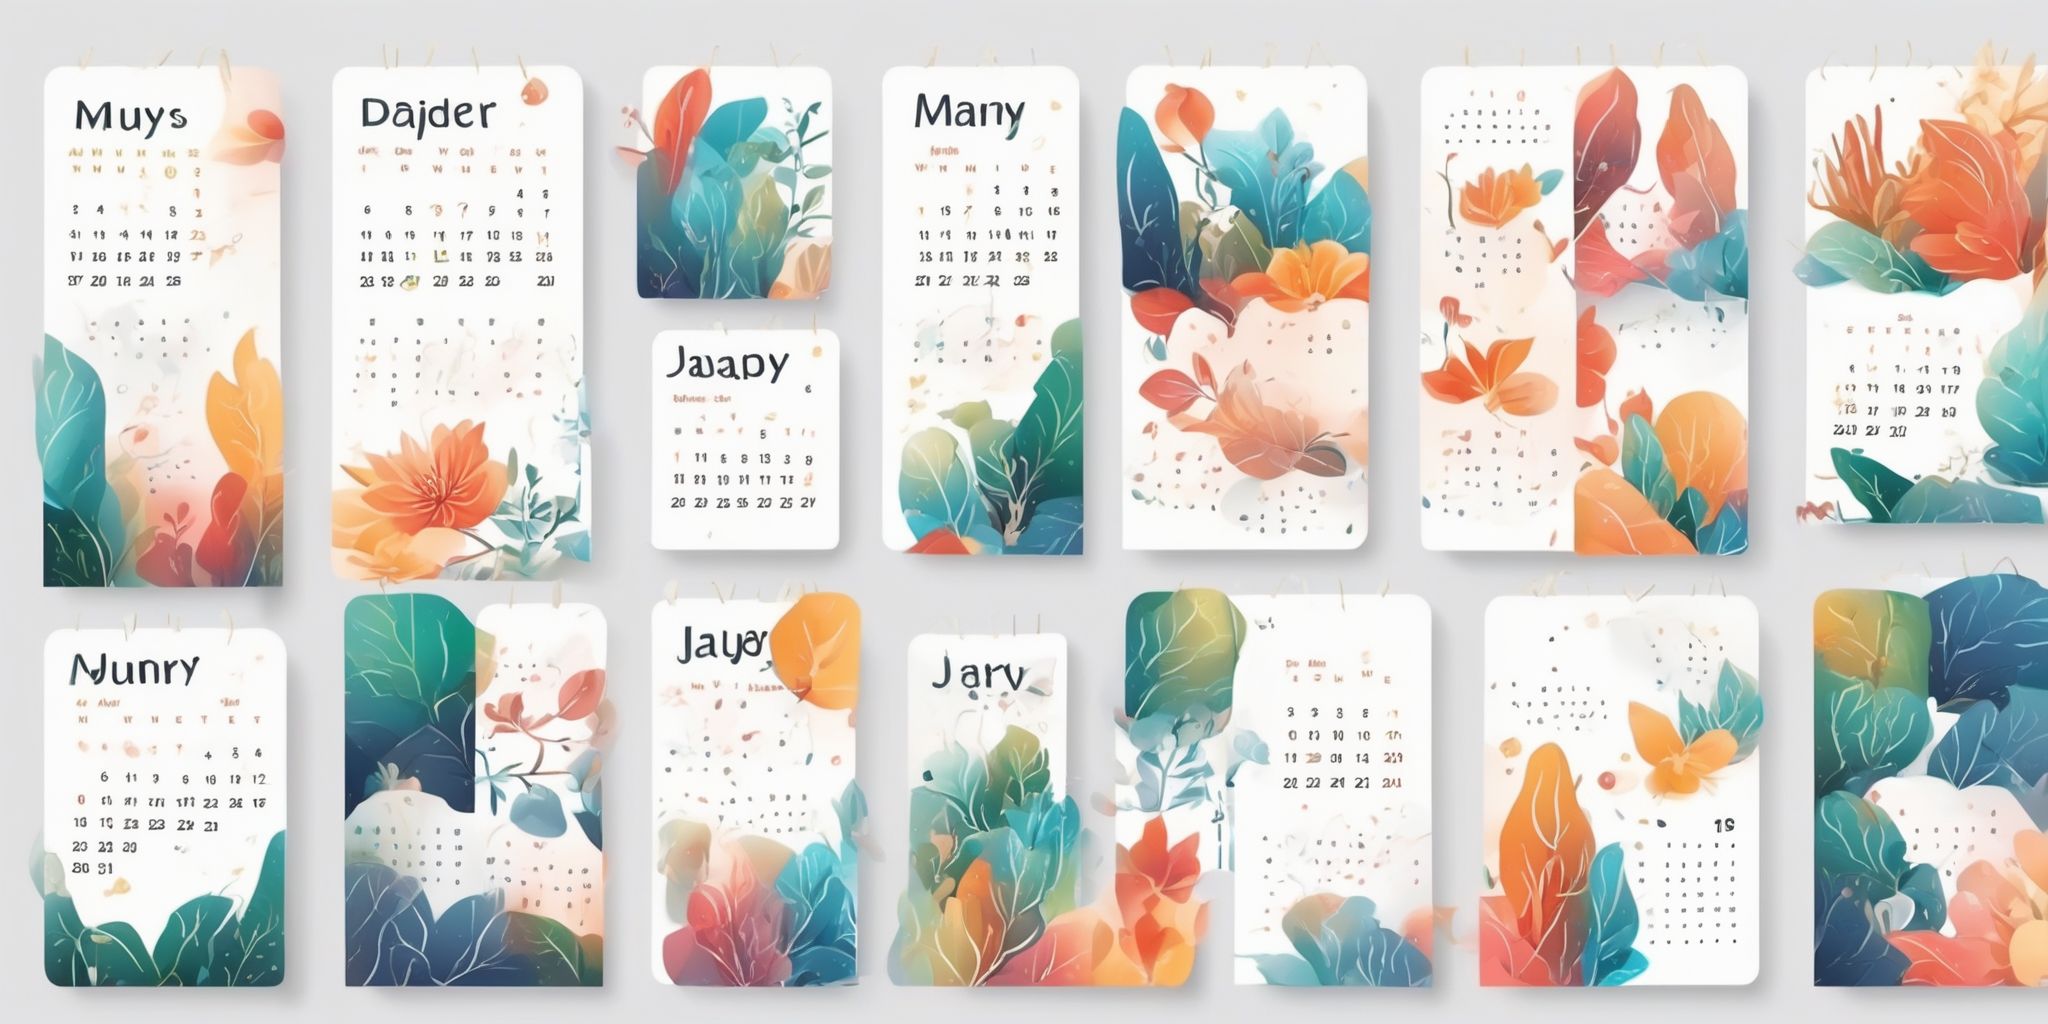 calendar in illustration style with gradients and white background